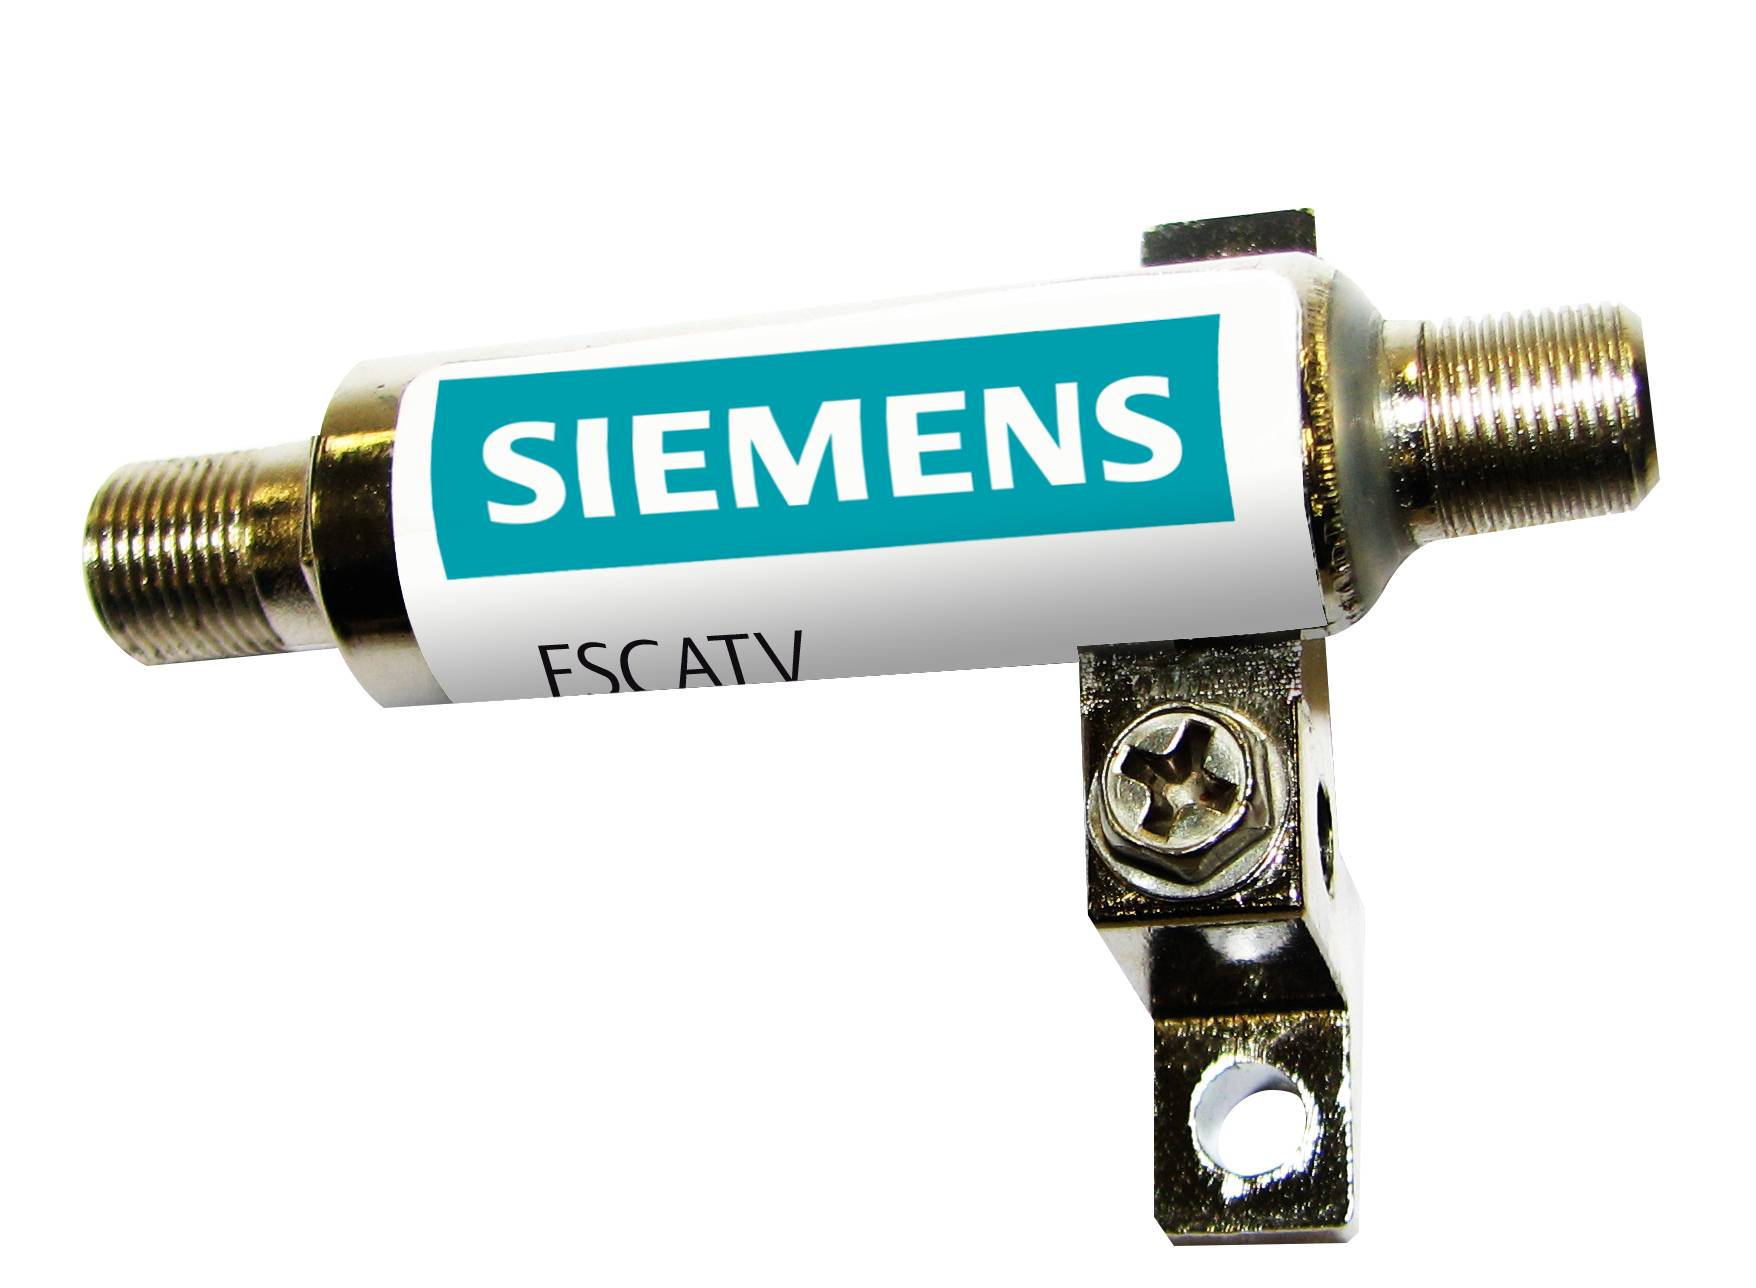 Siemens FirstSurge® FSCATV 1-Phase Coaxial Service Entrance Surge Protection